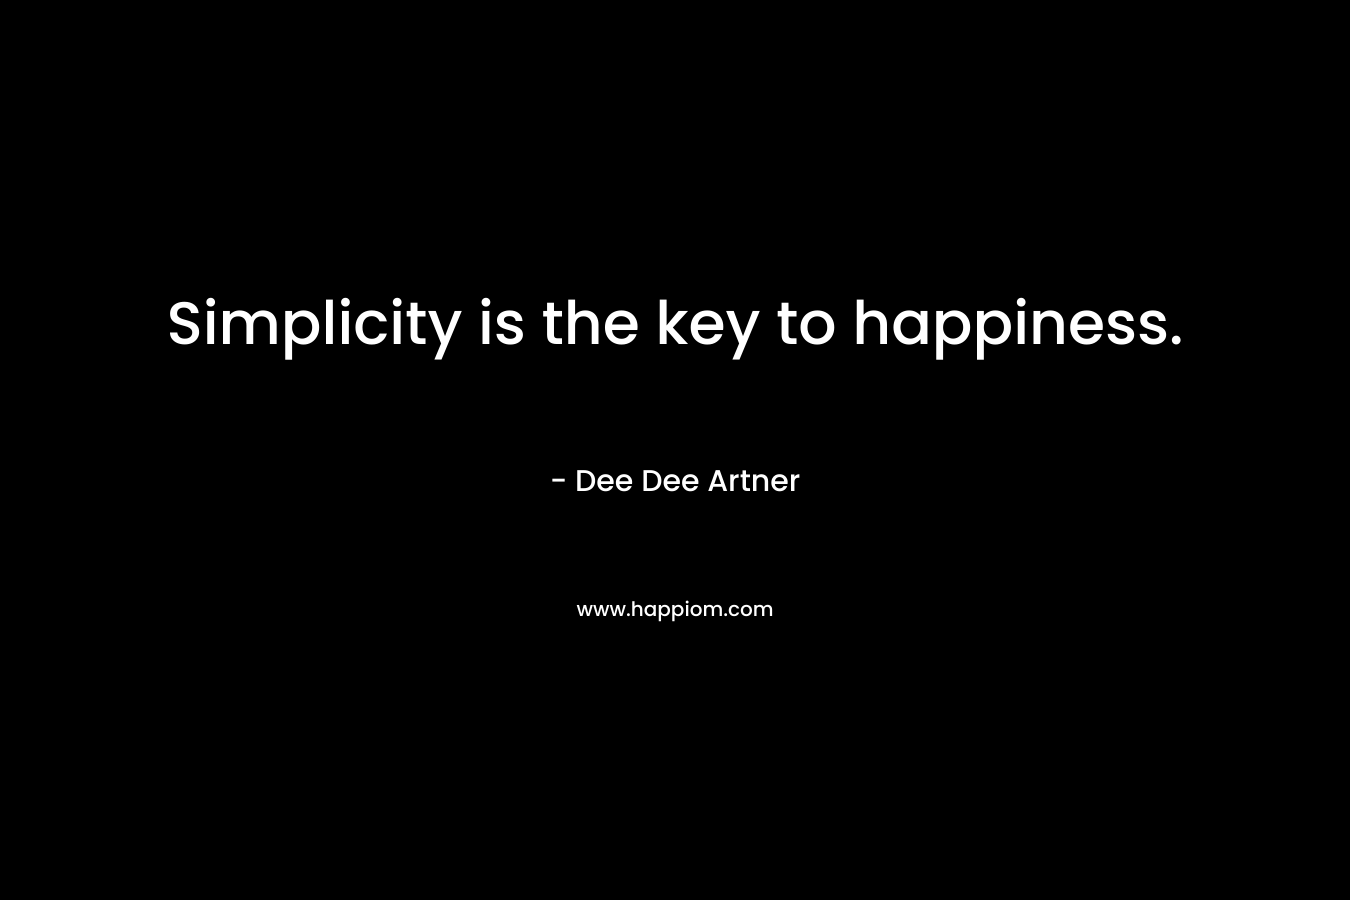 Simplicity is the key to happiness. – Dee Dee Artner